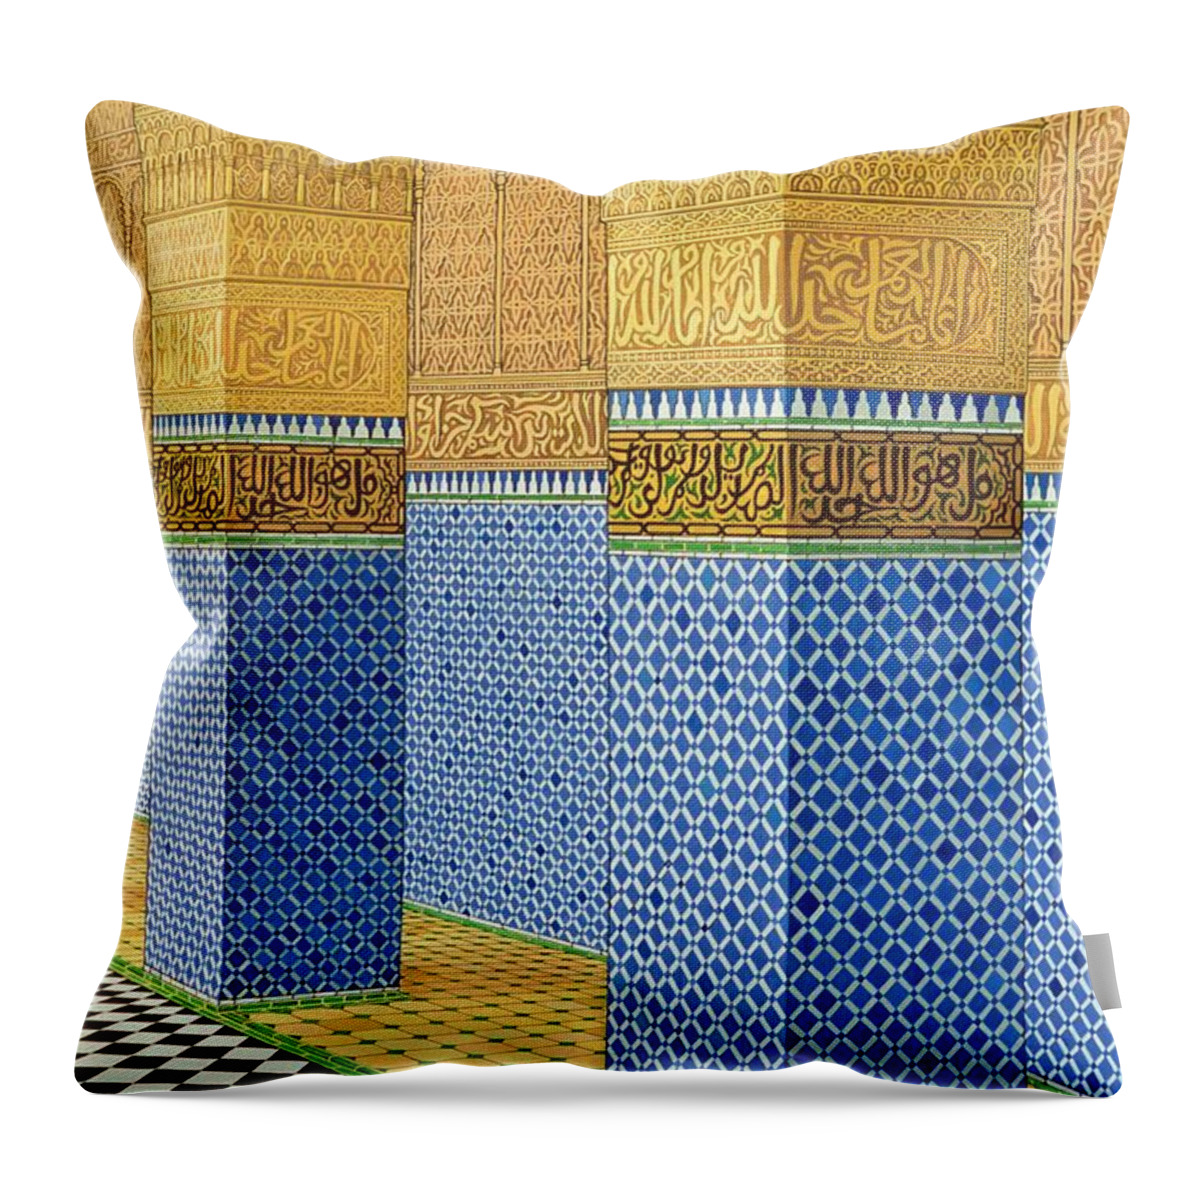 Moroccan Architecture Throw Pillow featuring the photograph Koranic School, Fez, 1998 Acrylic On Linen by Larry Smart